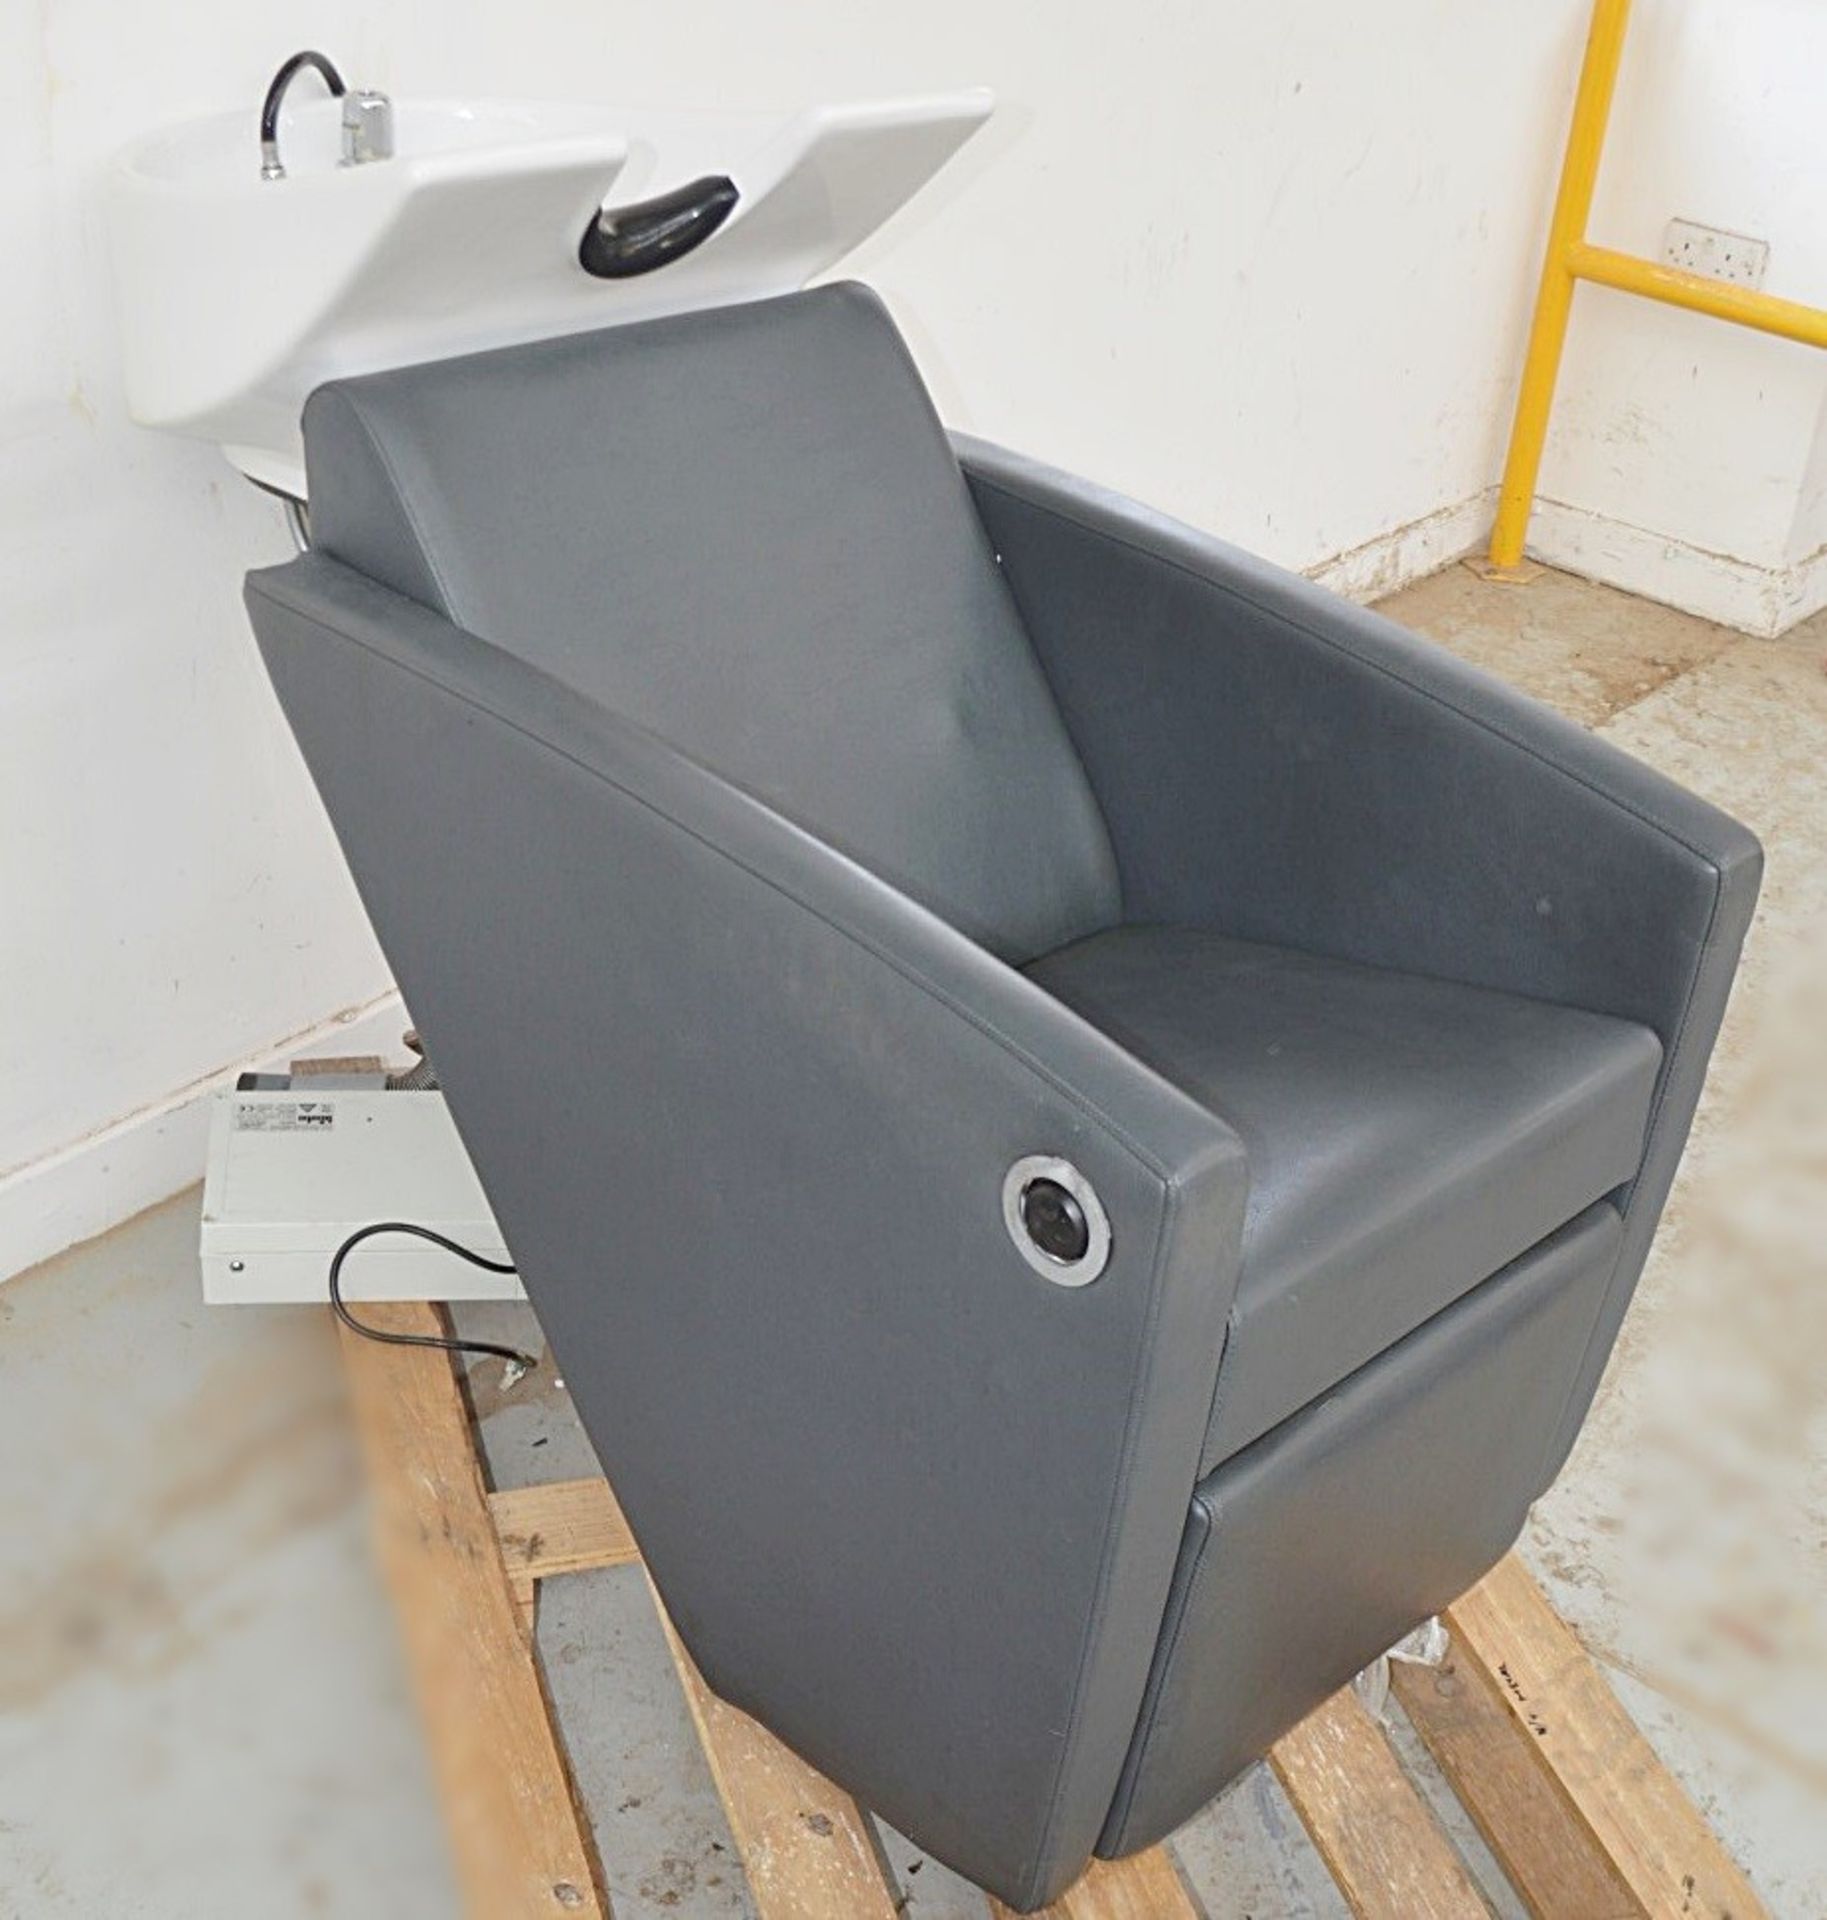 1 x Professional Reclining Hair Washing Chair With Basin Shower And Foot Rest - Image 15 of 19